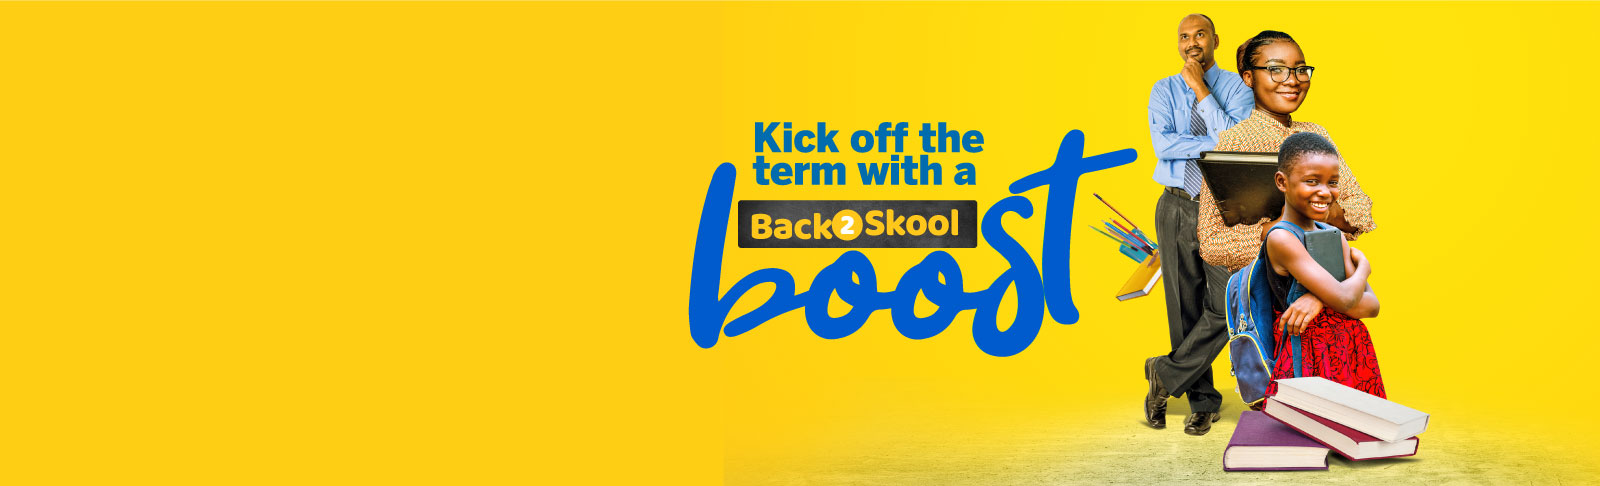 Back to Skool home page image